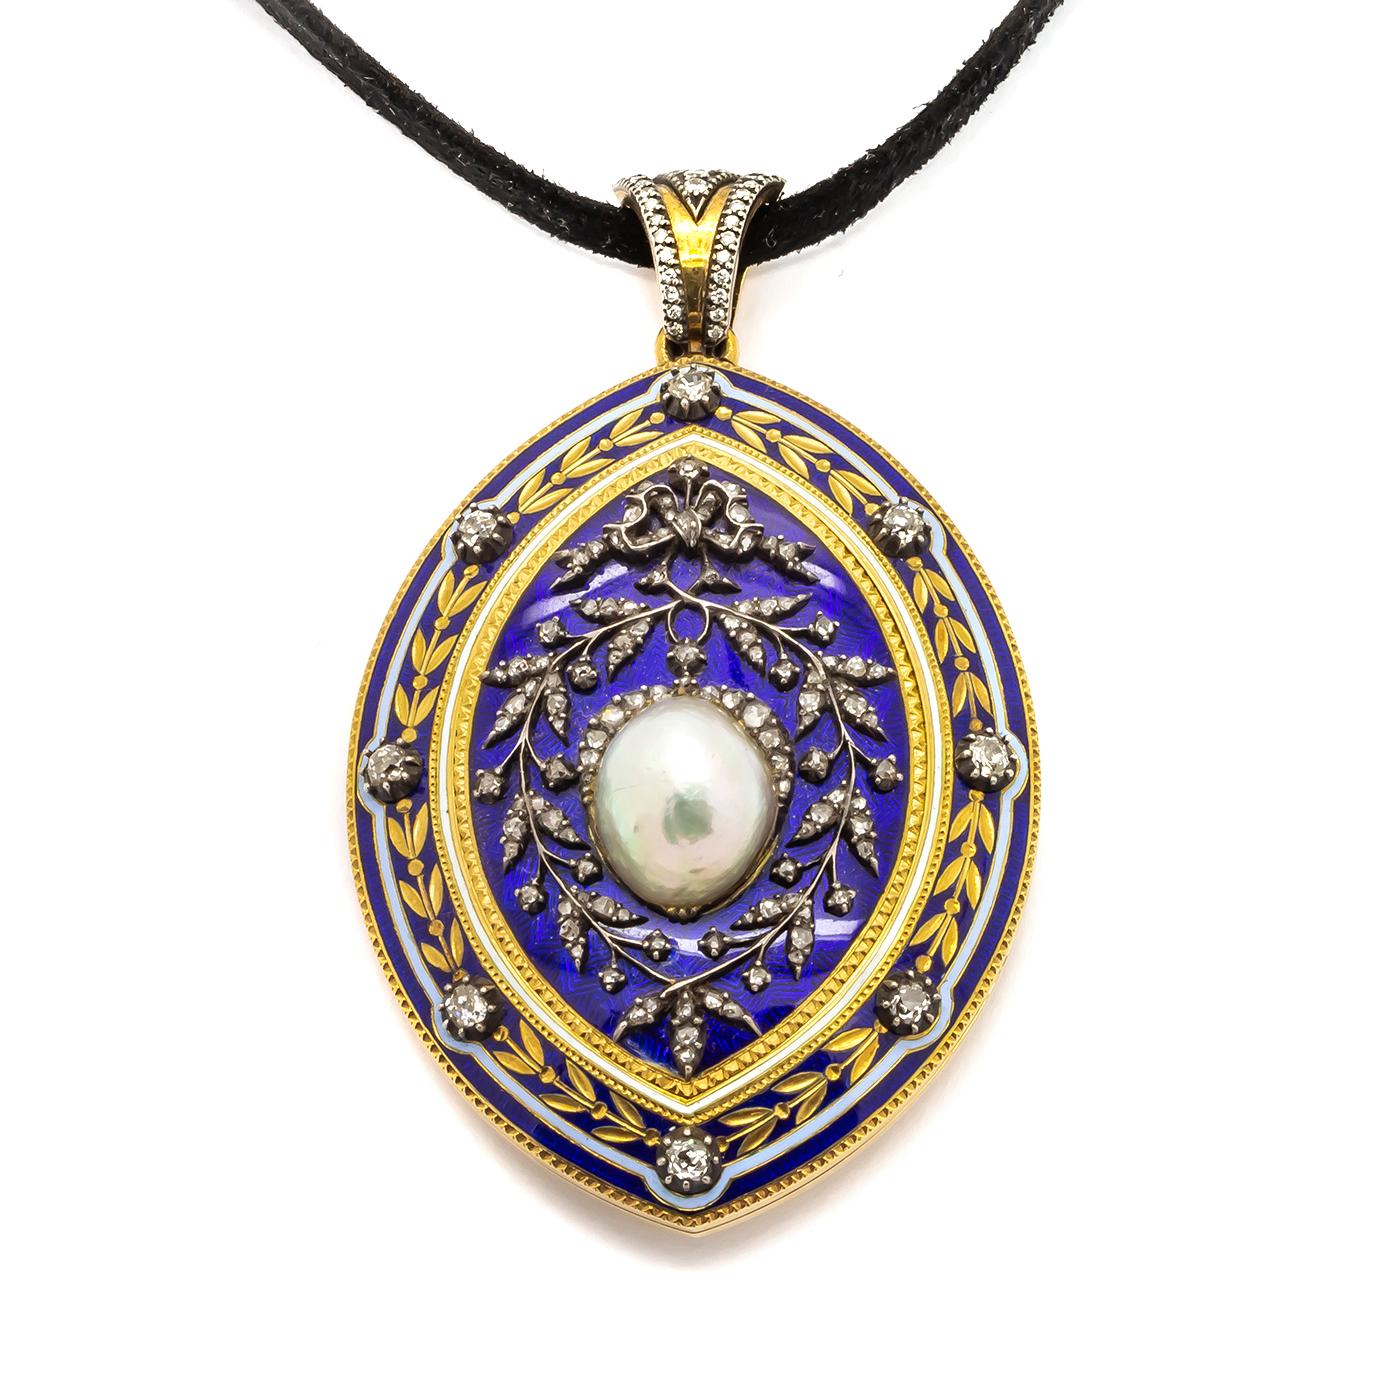 A Victorian blue enamel, diamond and pearl pendant, with a navette outline, set with a central natural pearl, on a background of blue, guilloche enamel, with white enamel outlines and square nailhead and gold wreath decoration, alternating with